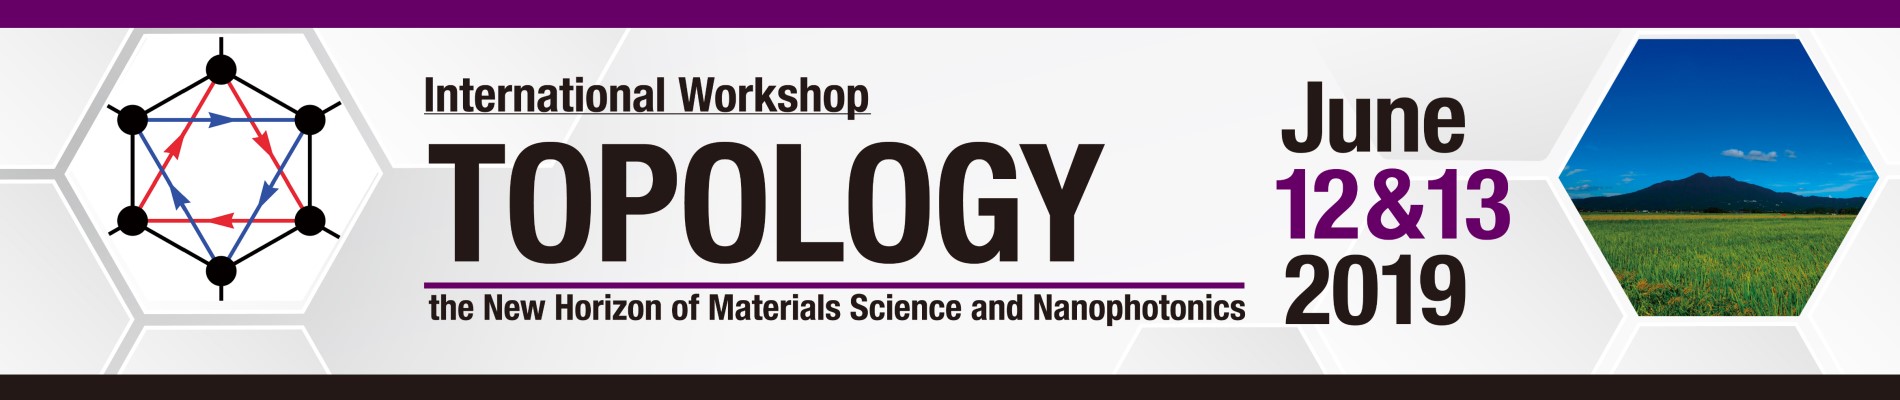 International Workshop Topology the new horizon of materials science and nanophotonics